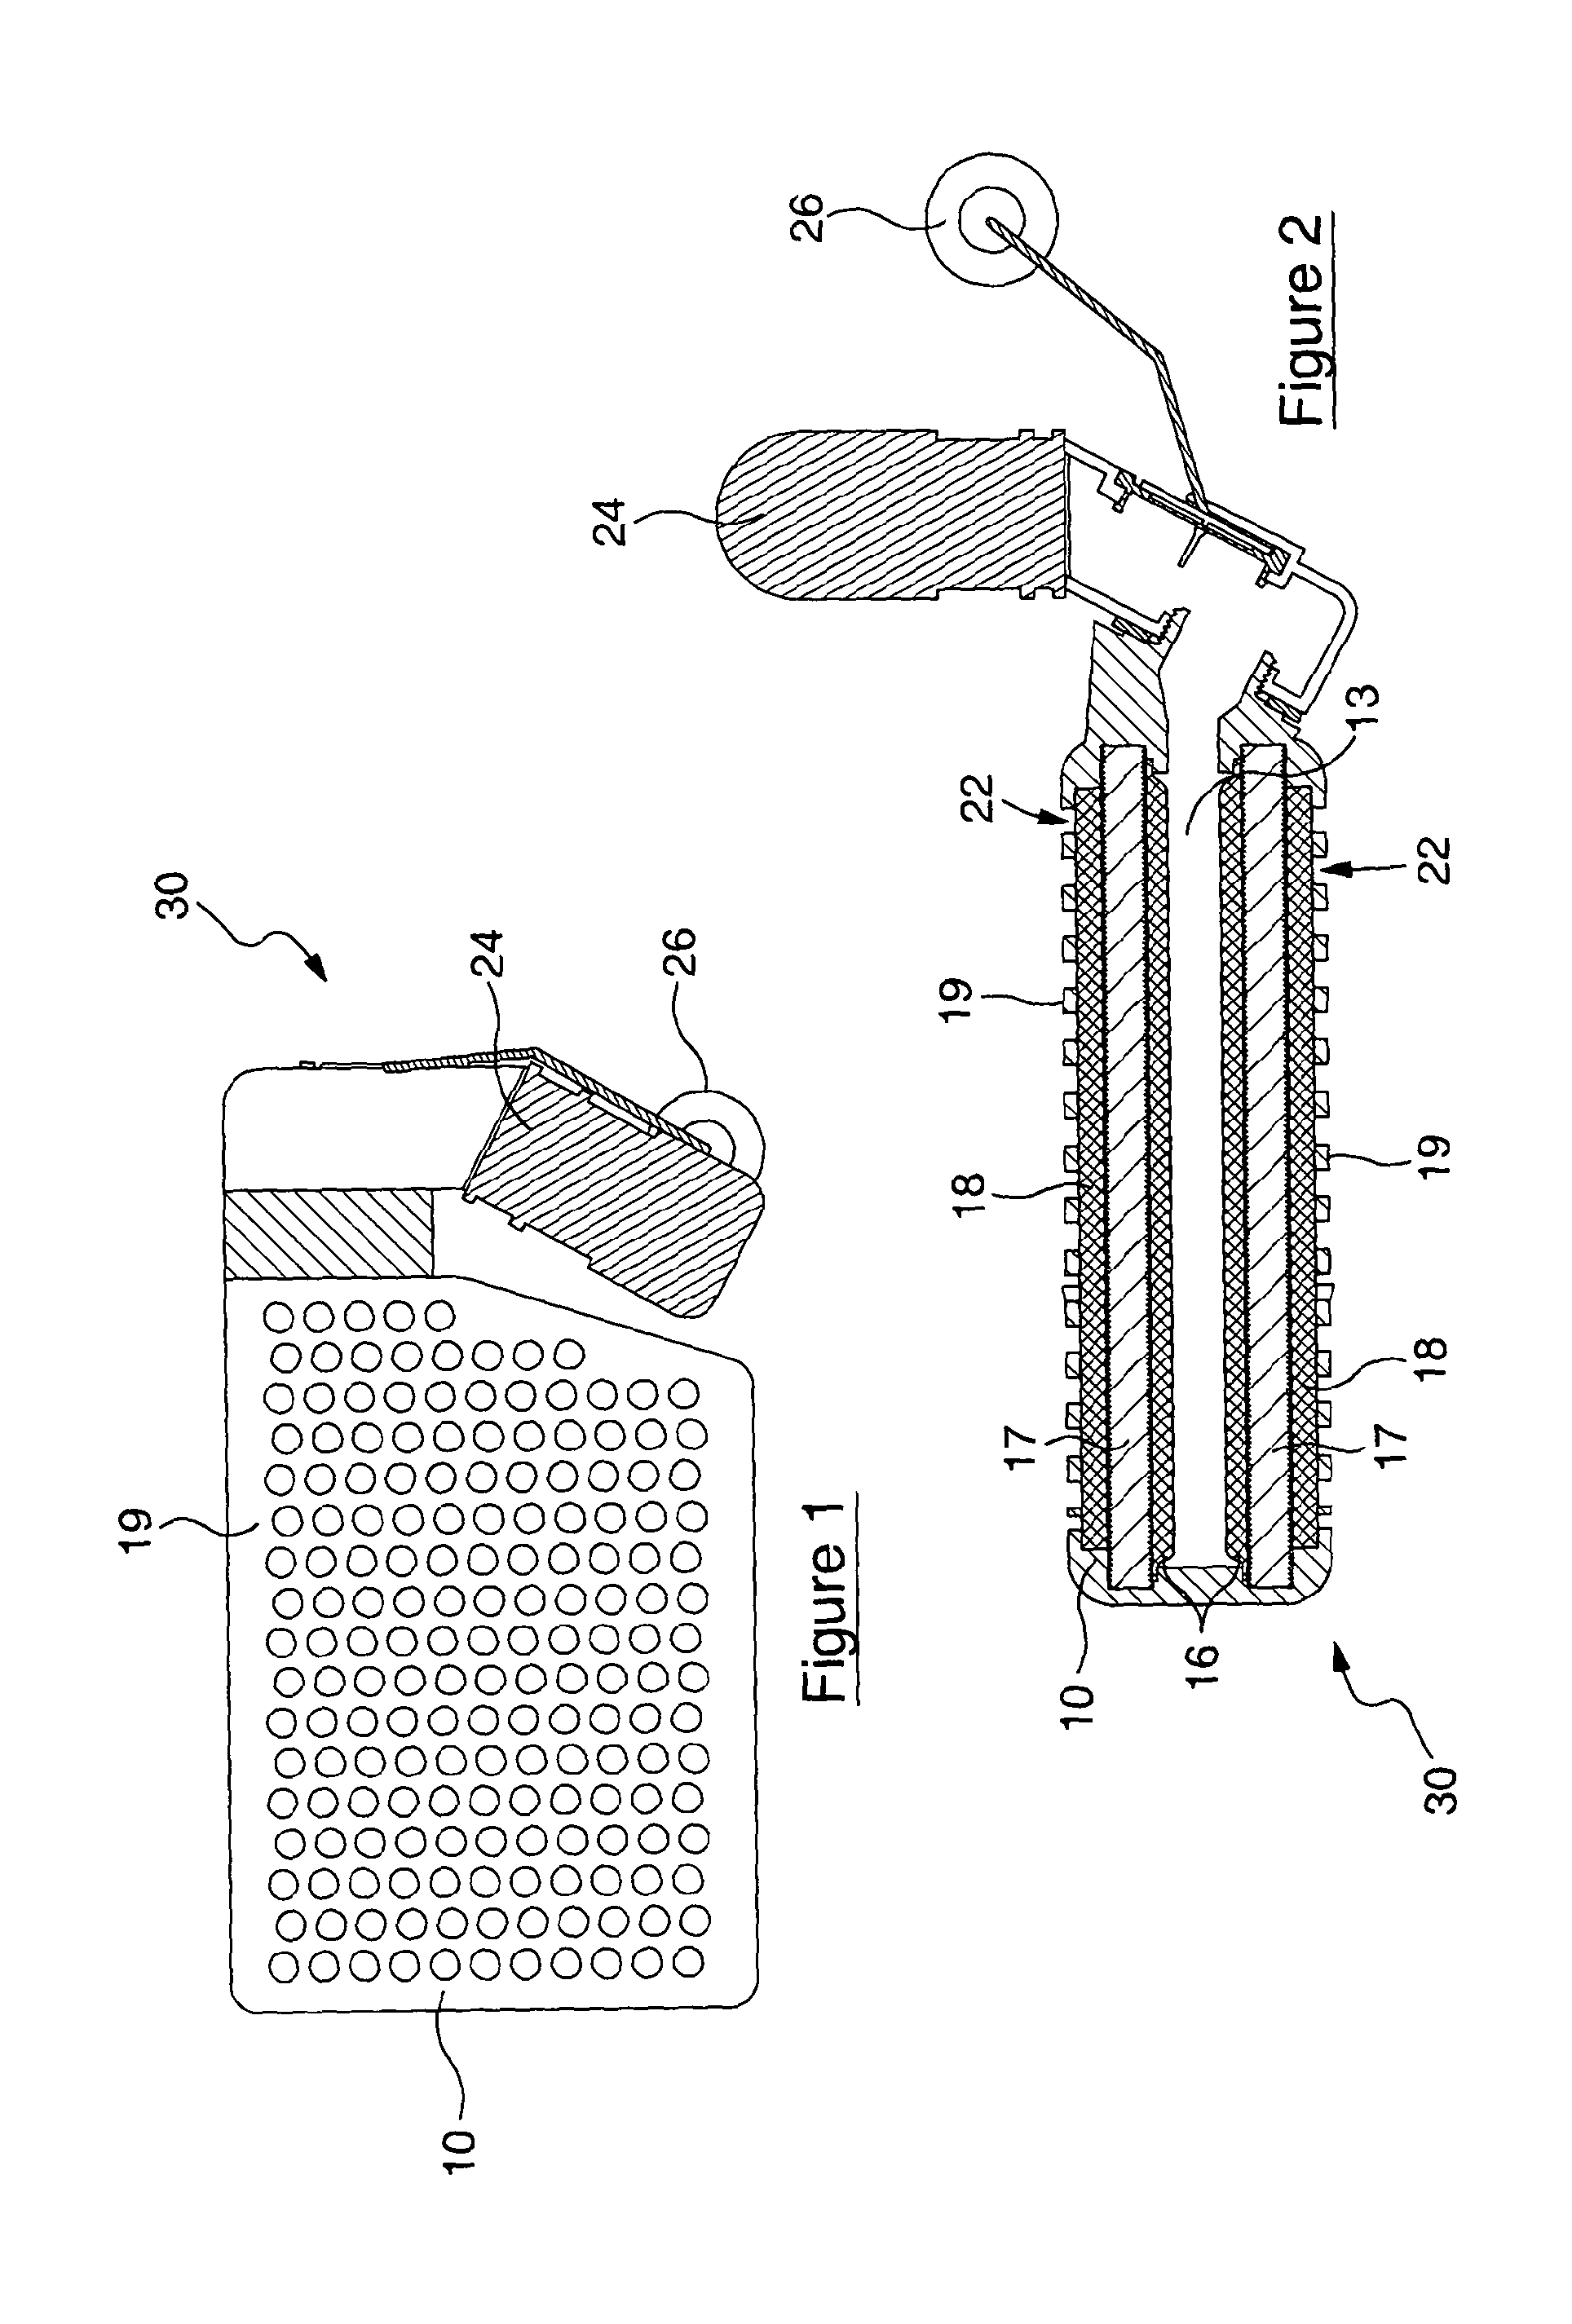 Filter box assembly and filter unit